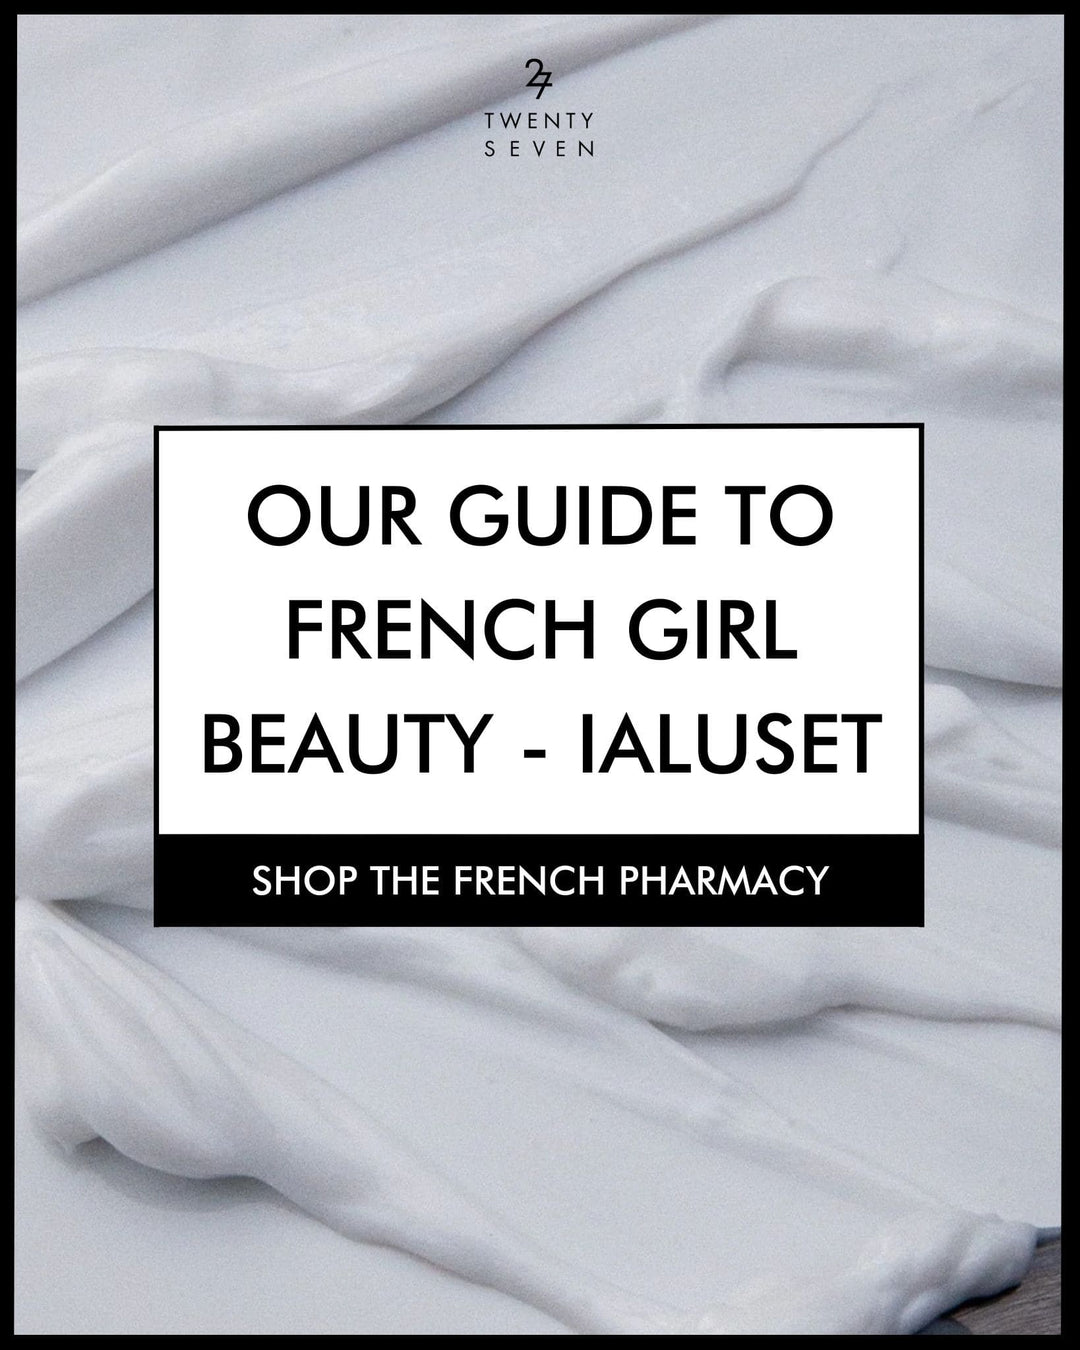 Ialuset Hyaluronic Acid Cream: The French Girl Beauty Secret to Plump Skin